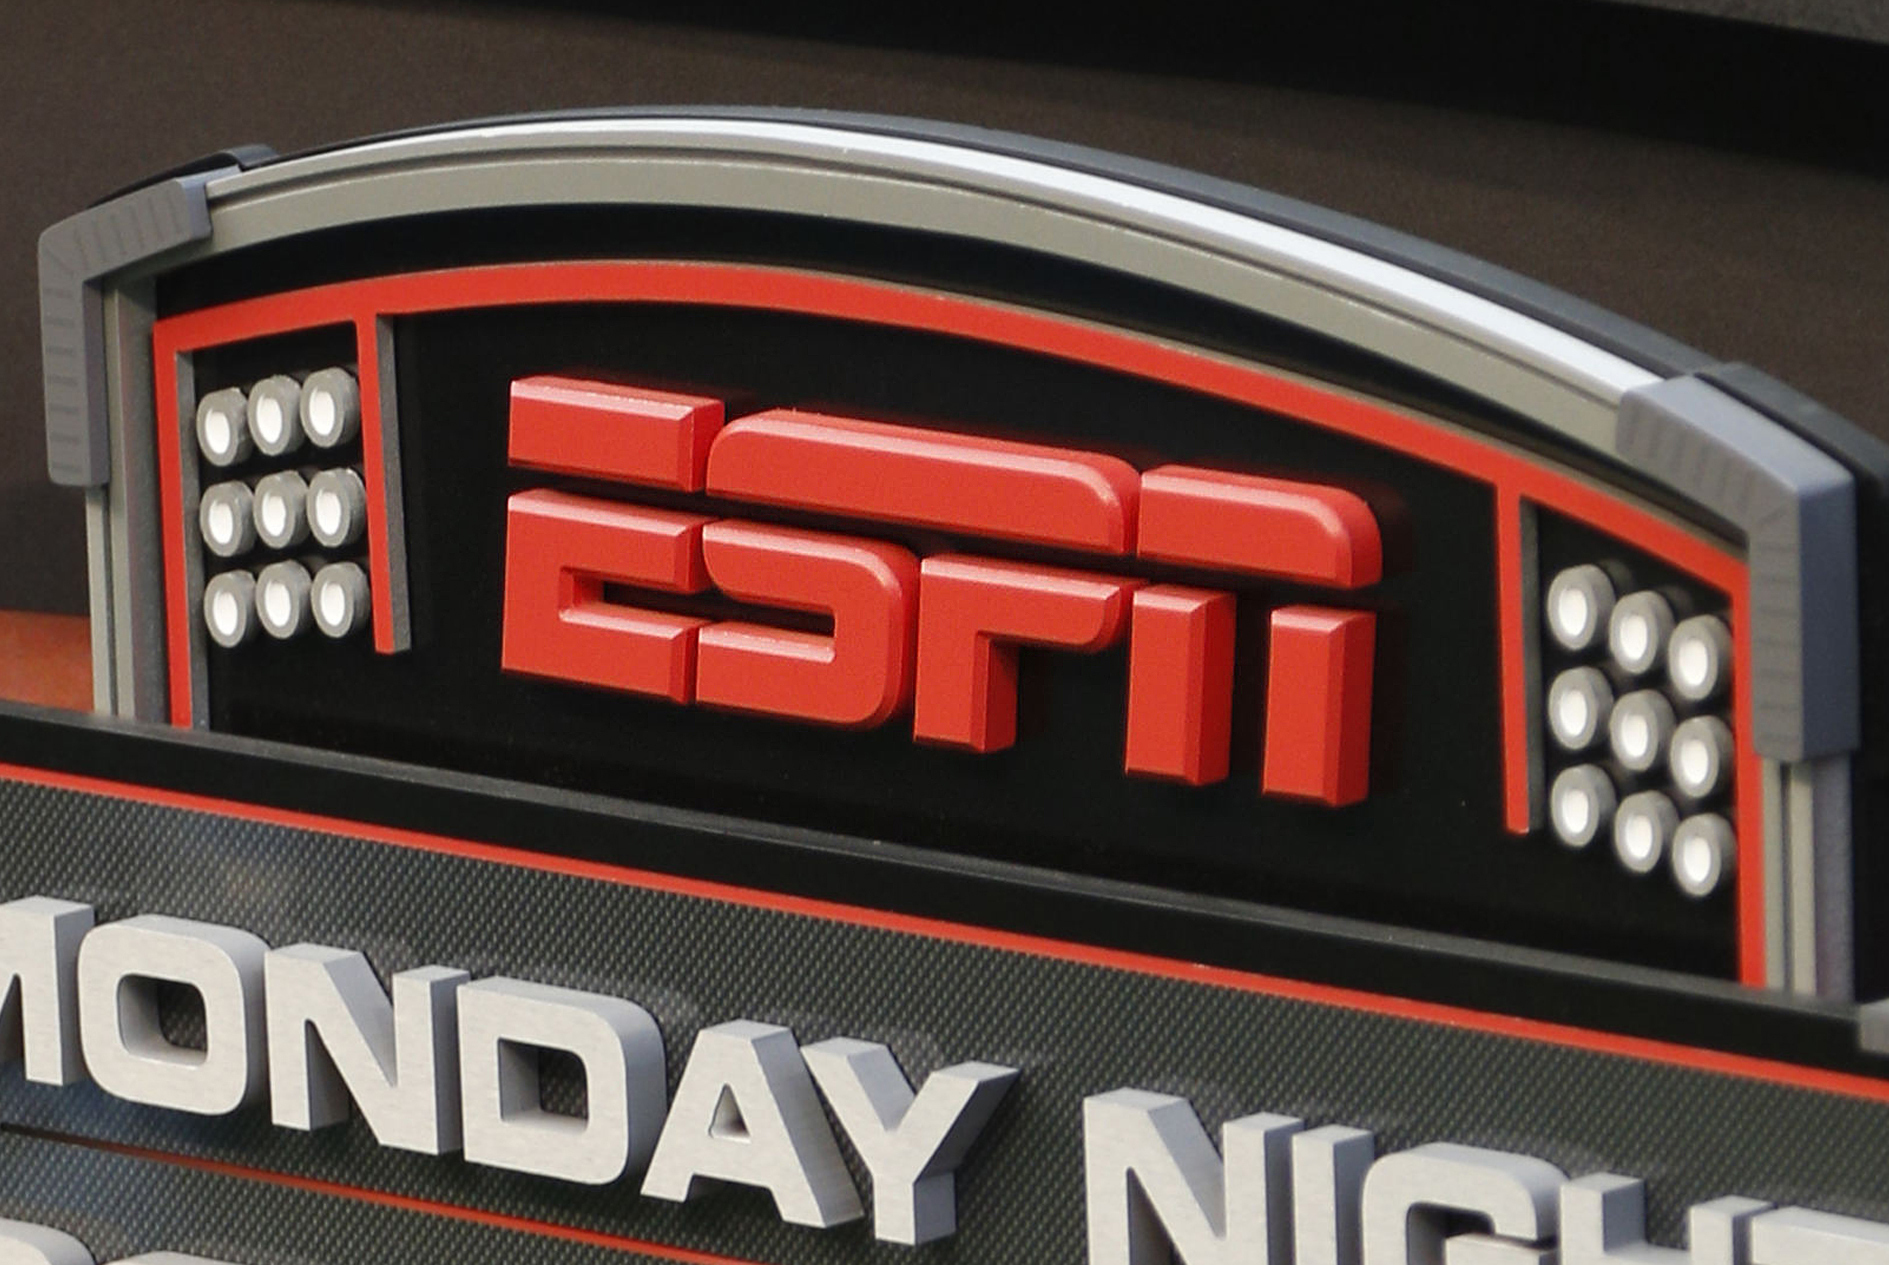 This Sept. 16, 2013 photo shows the ESPN logo prior to an NFL football game between the Cincinnati Bengals and the Pittsburgh Steelers, in Cincinnati.